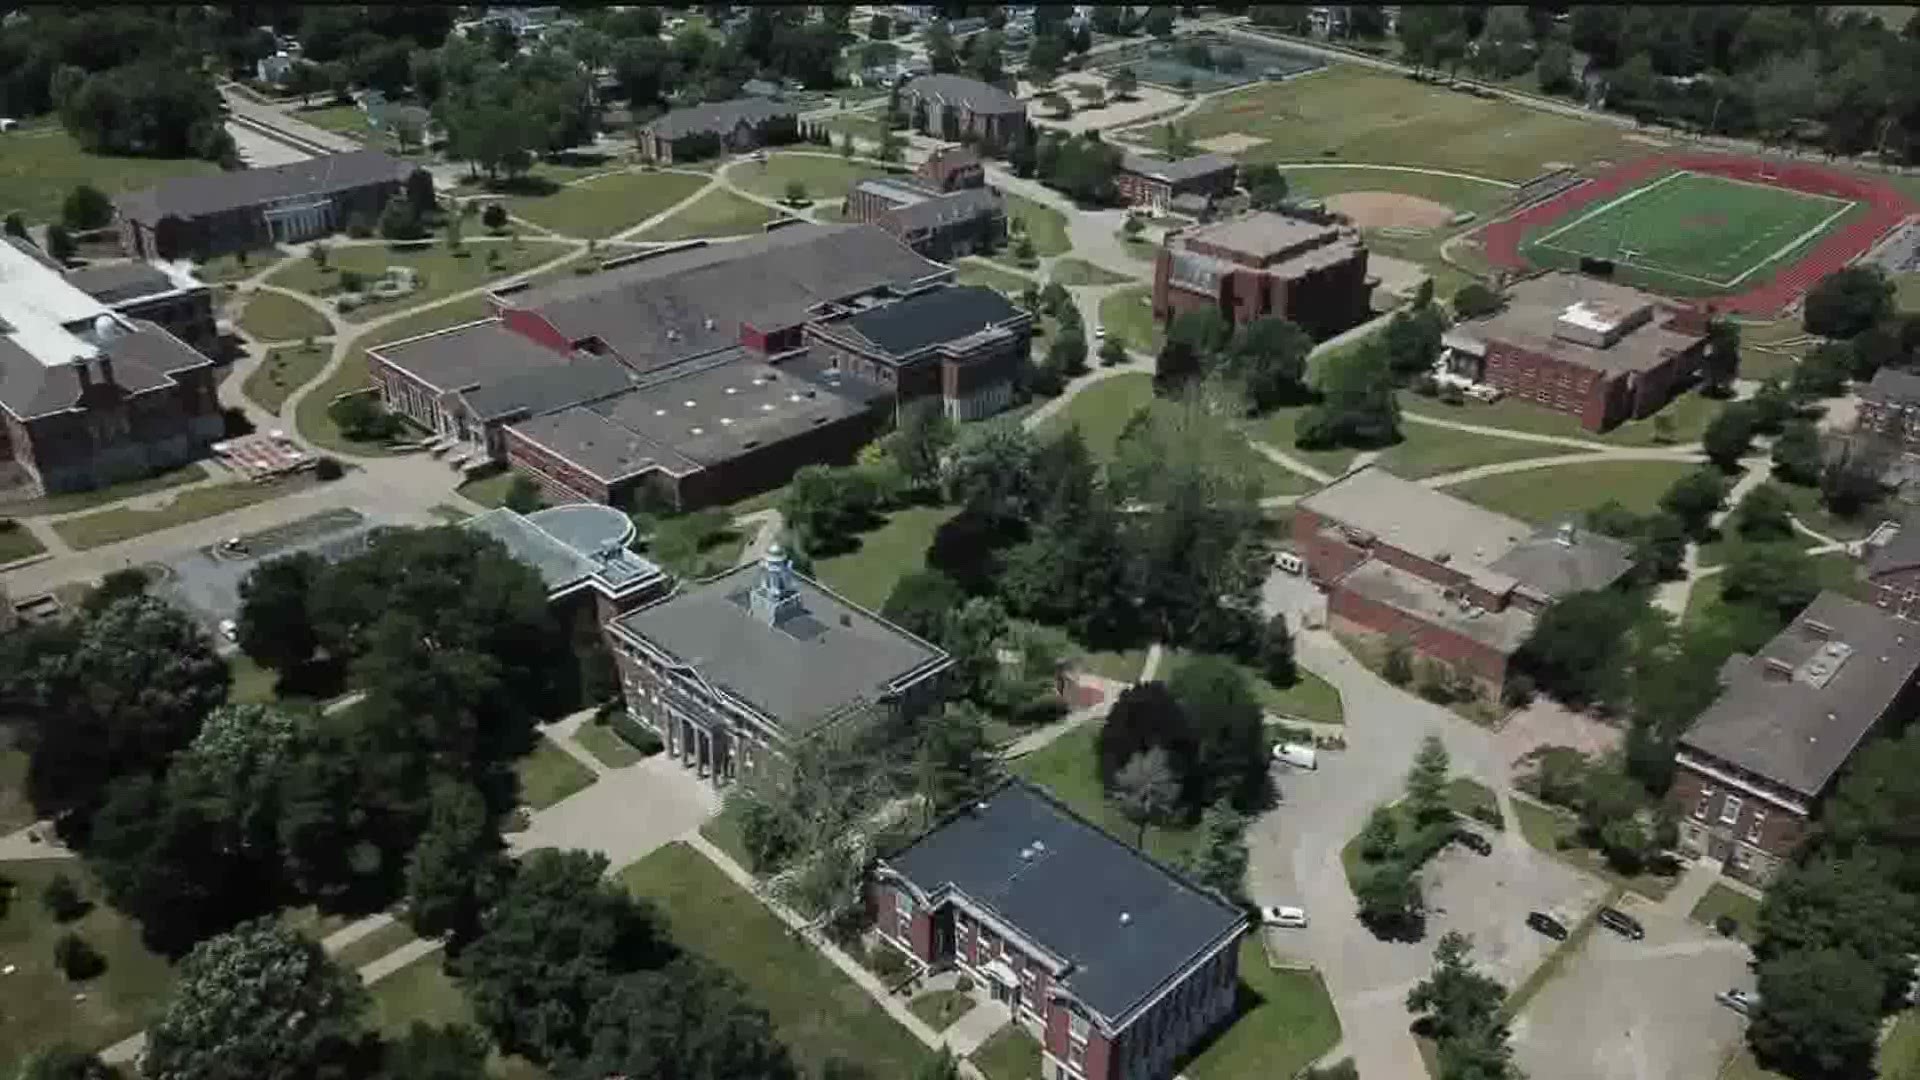 Monmouth College to allow single rooms